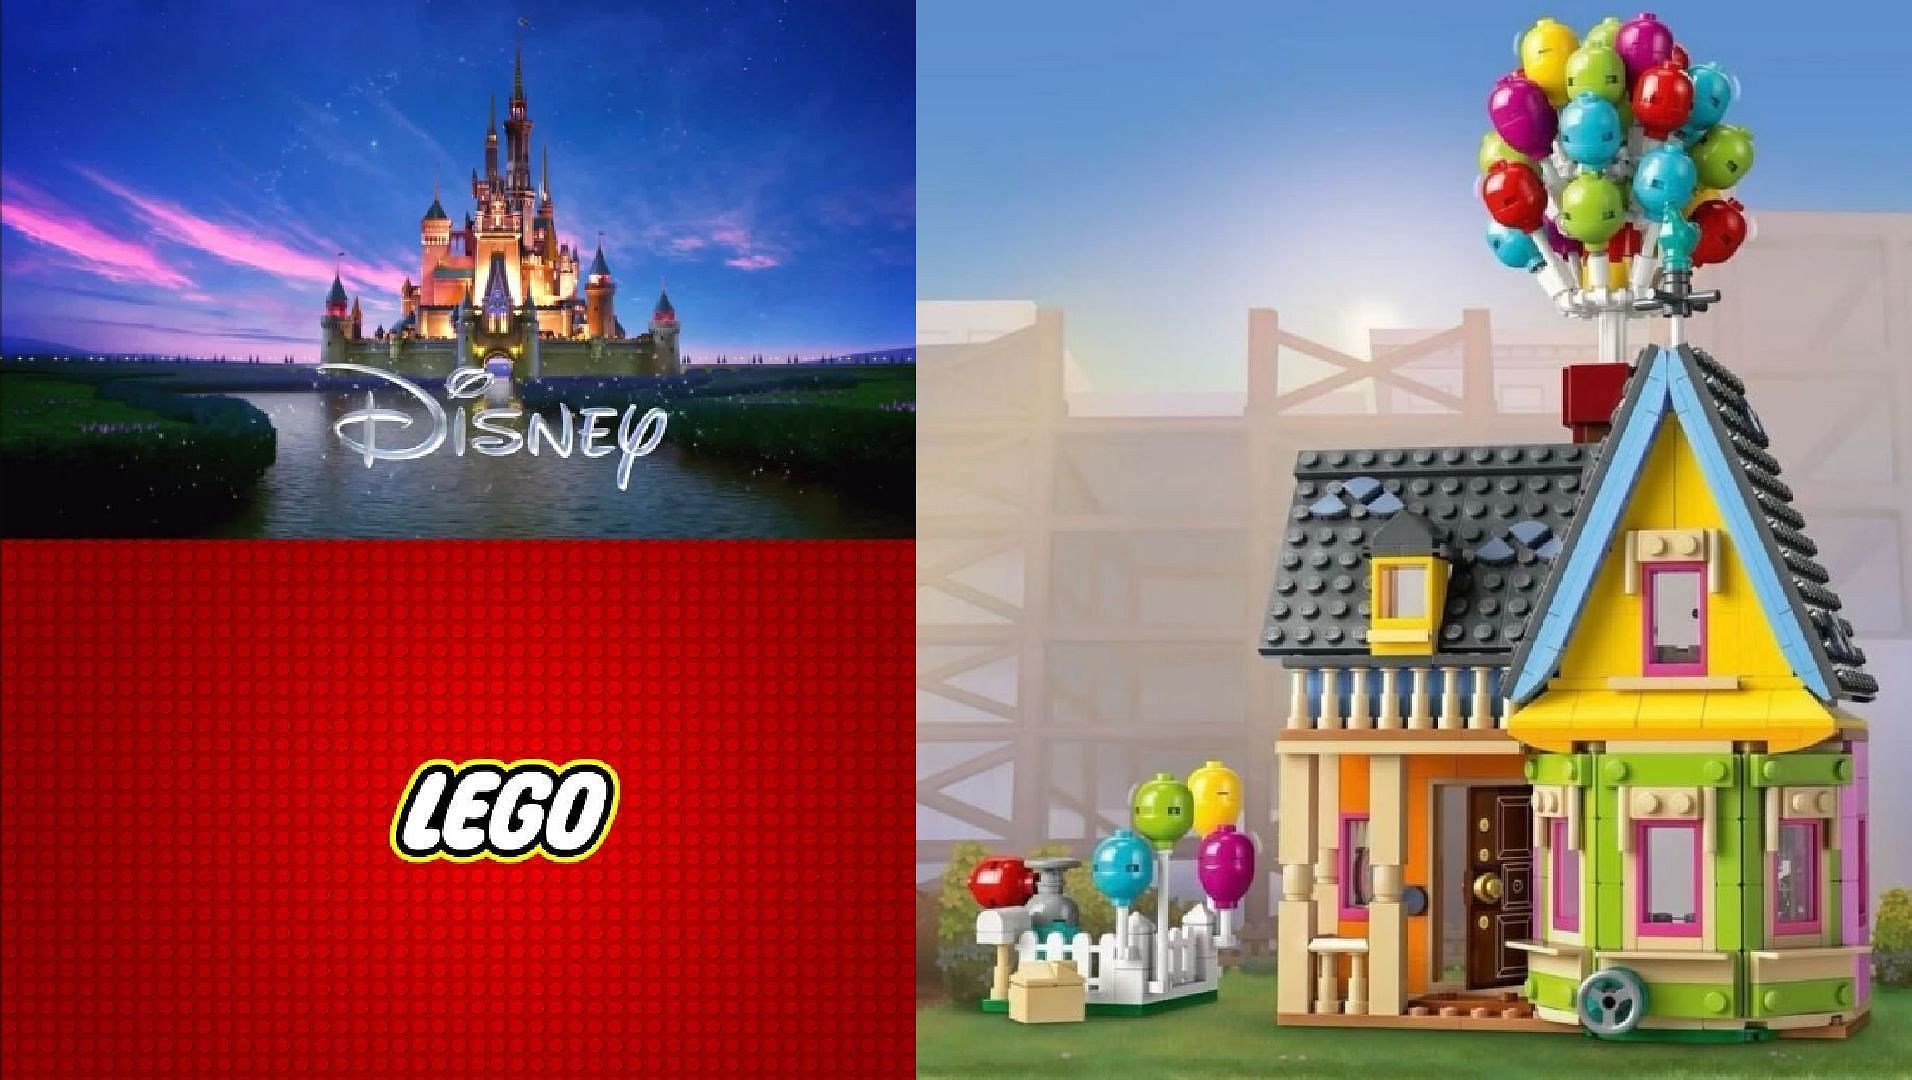 Disney 100 Lego sets: Price, release date, and more about Up House and  Disney Birthday/Celebration Train explored